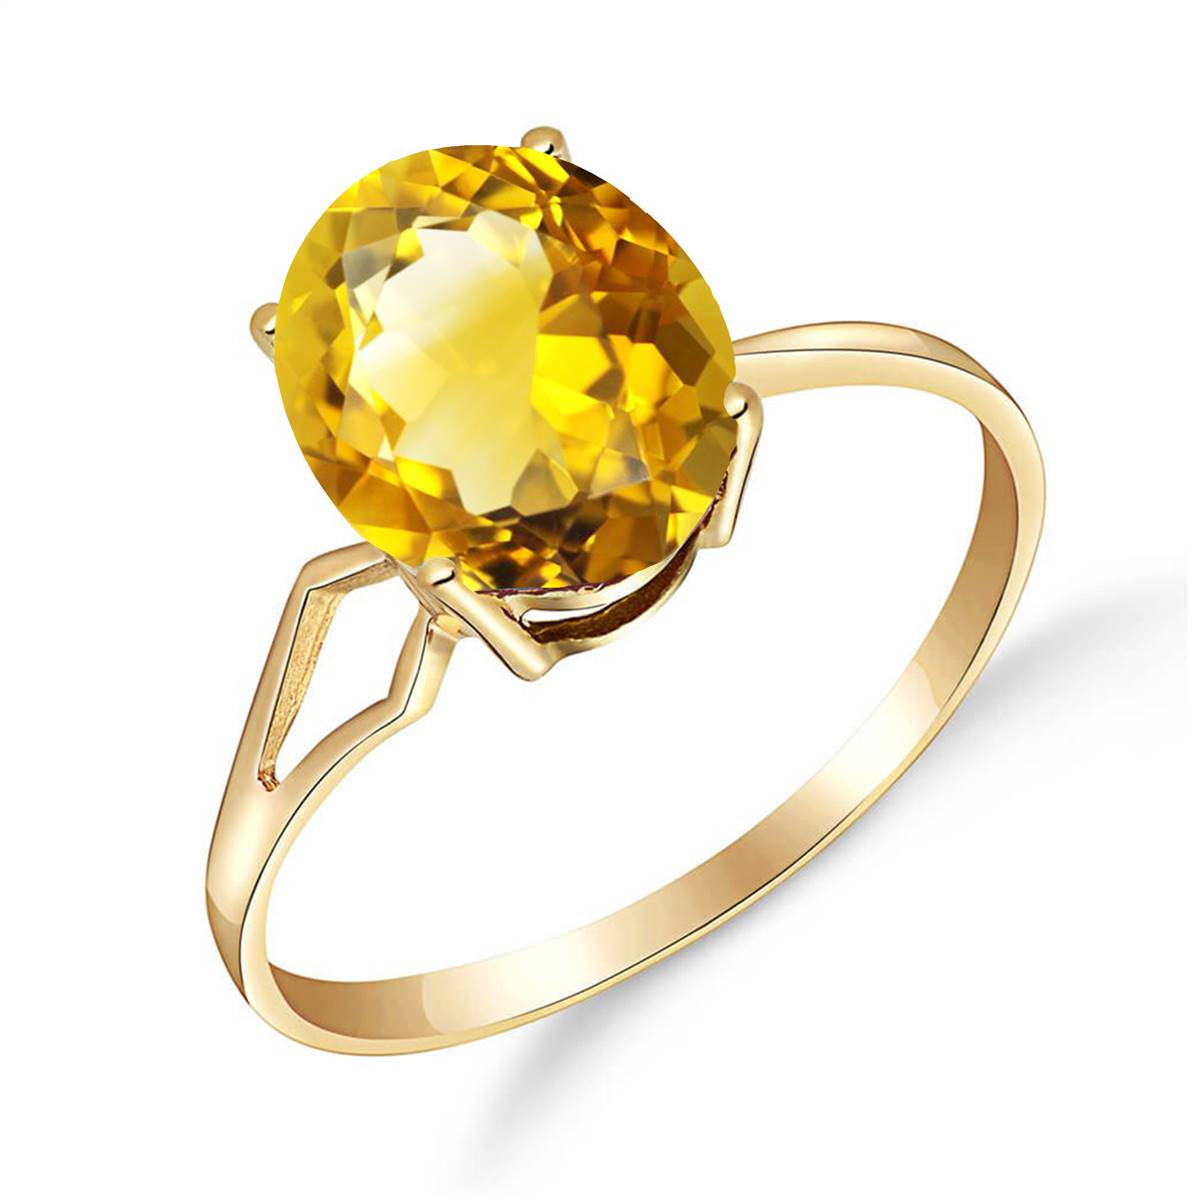 2.2 Carat 14K Solid Yellow Gold Exclamations Citrine Ring